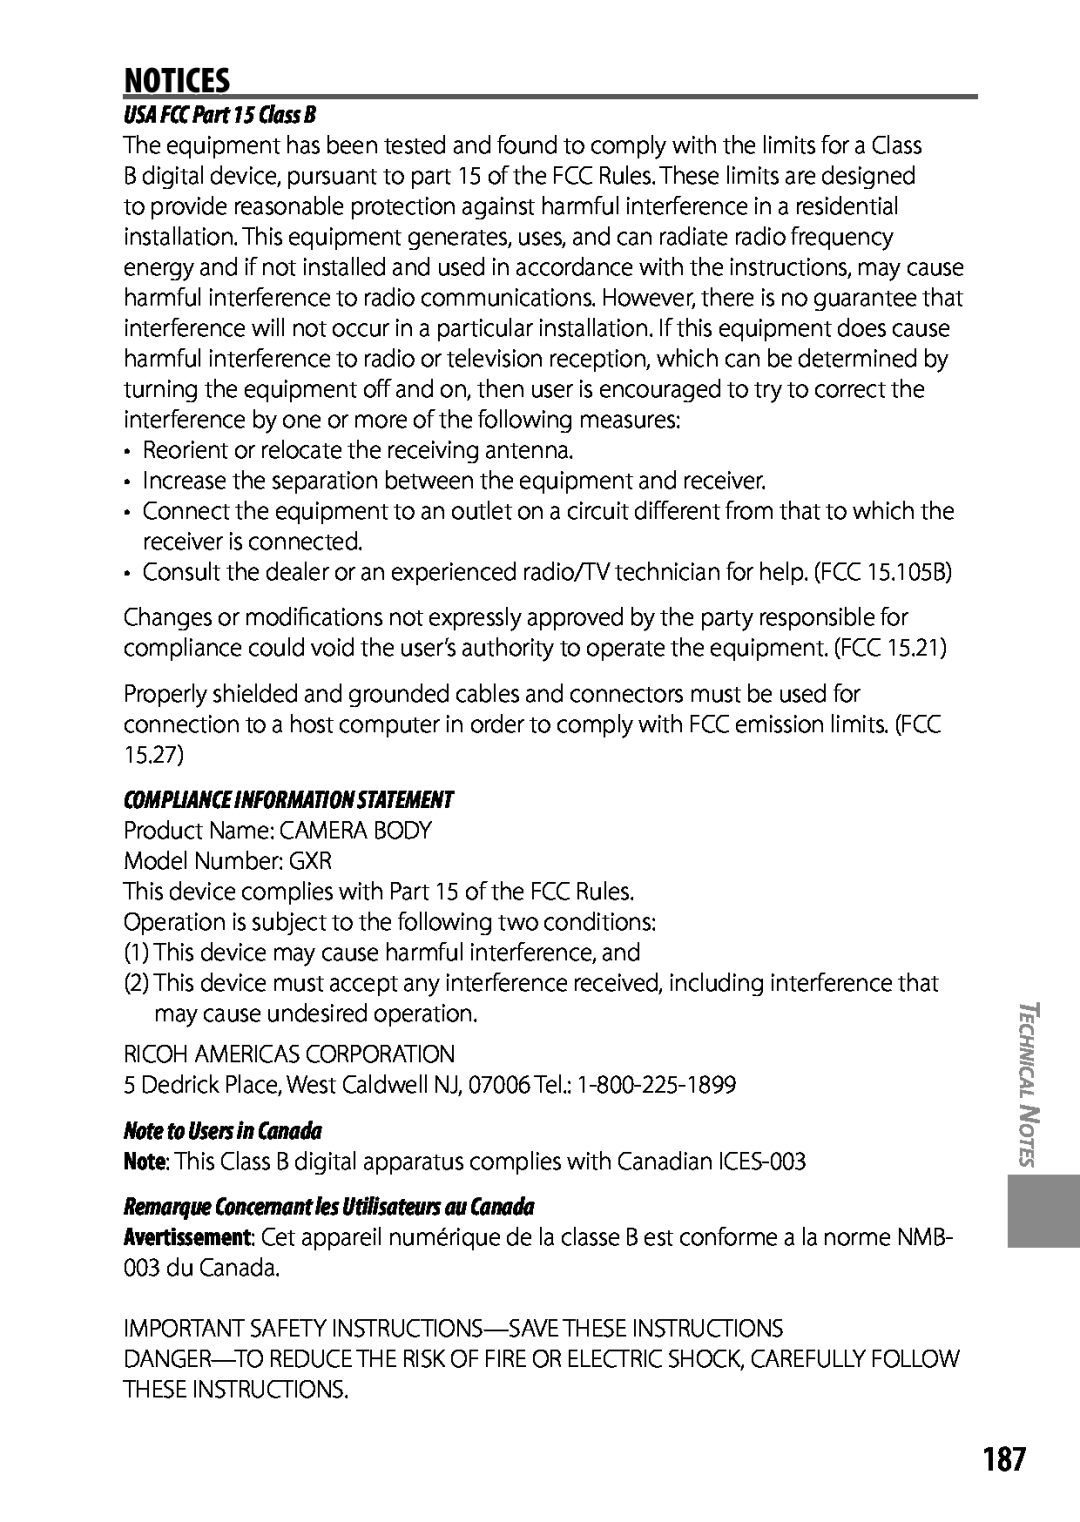 Ricoh 170543 Notices, USA FCC Part 15 Class B, Note to Users in Canada, Remarque Concernant les Utilisateurs au Canada 